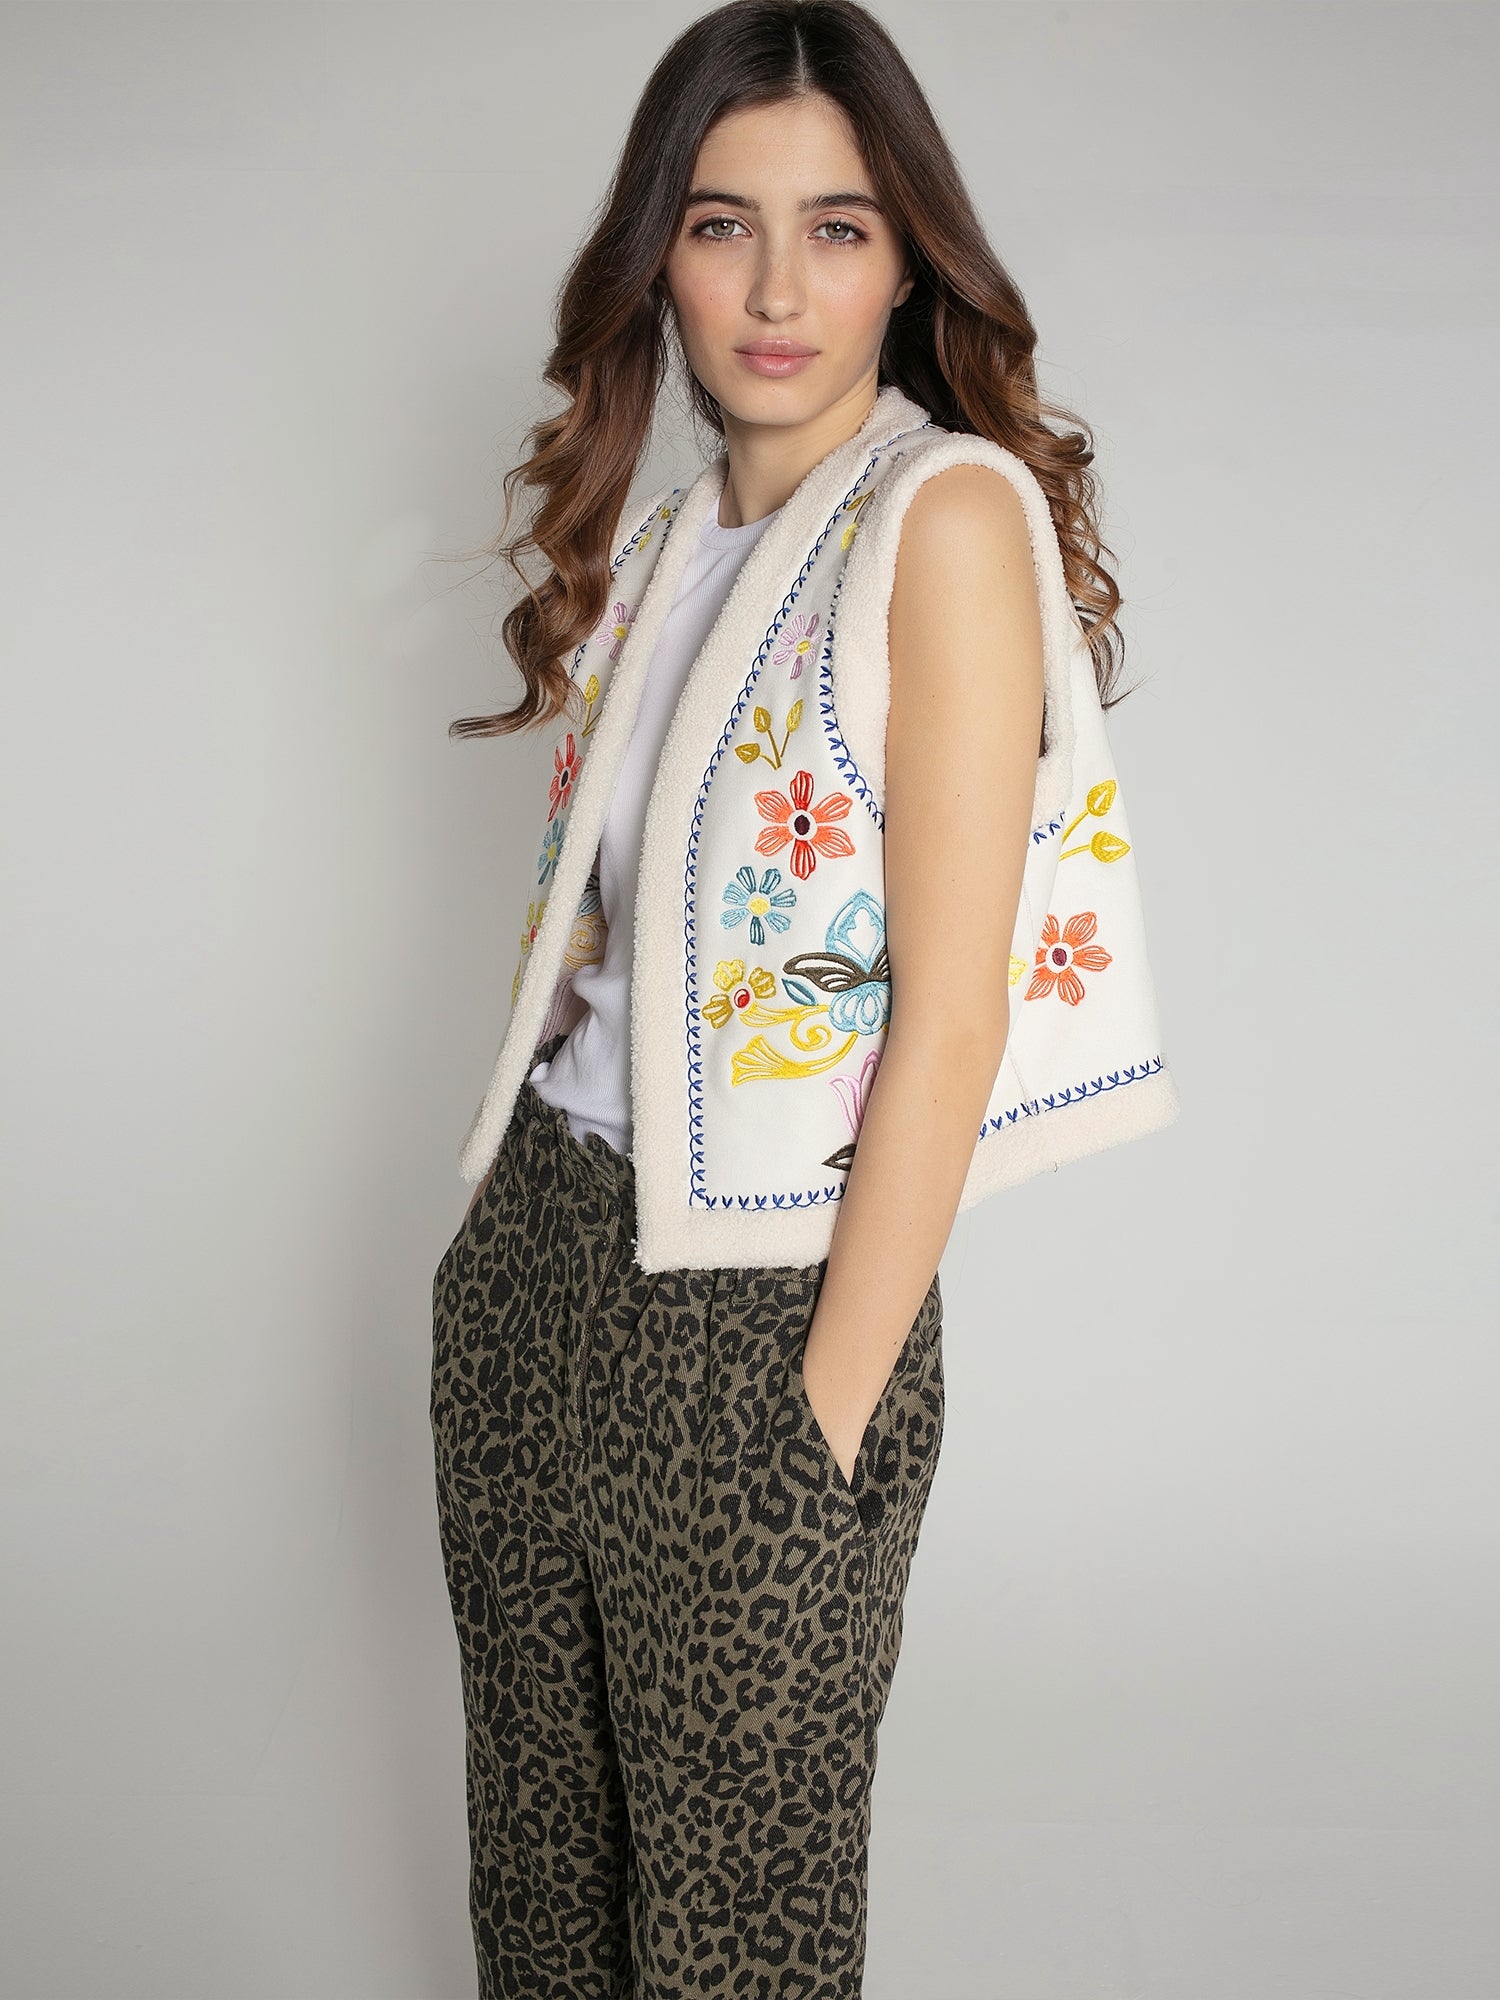 Cassidy embroidered Gilet